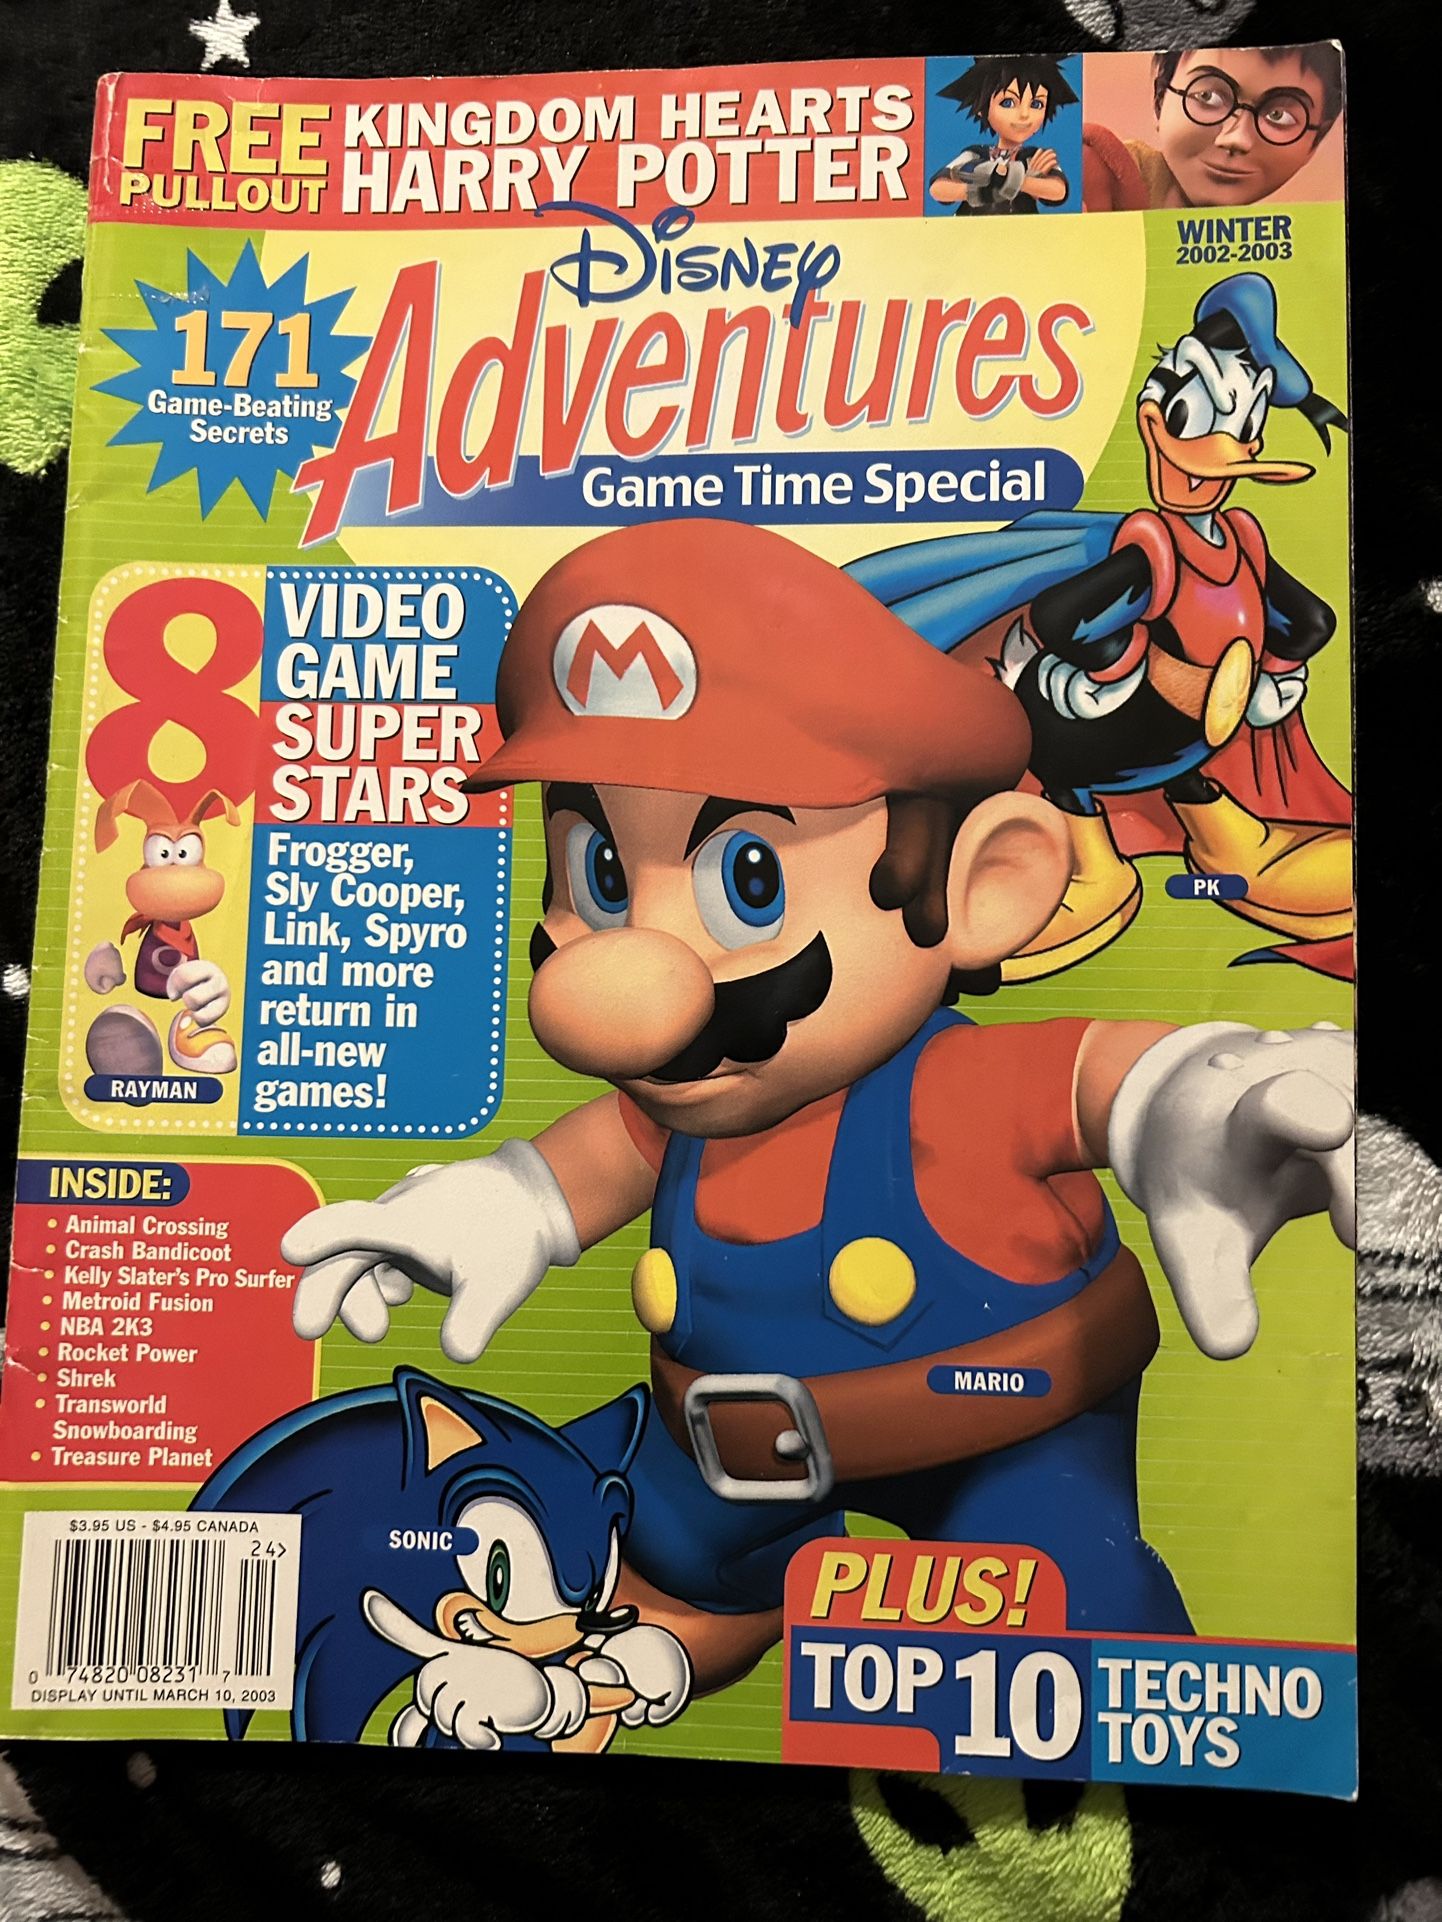 Disney Adventures Game Time Special, Winter 2002/2003